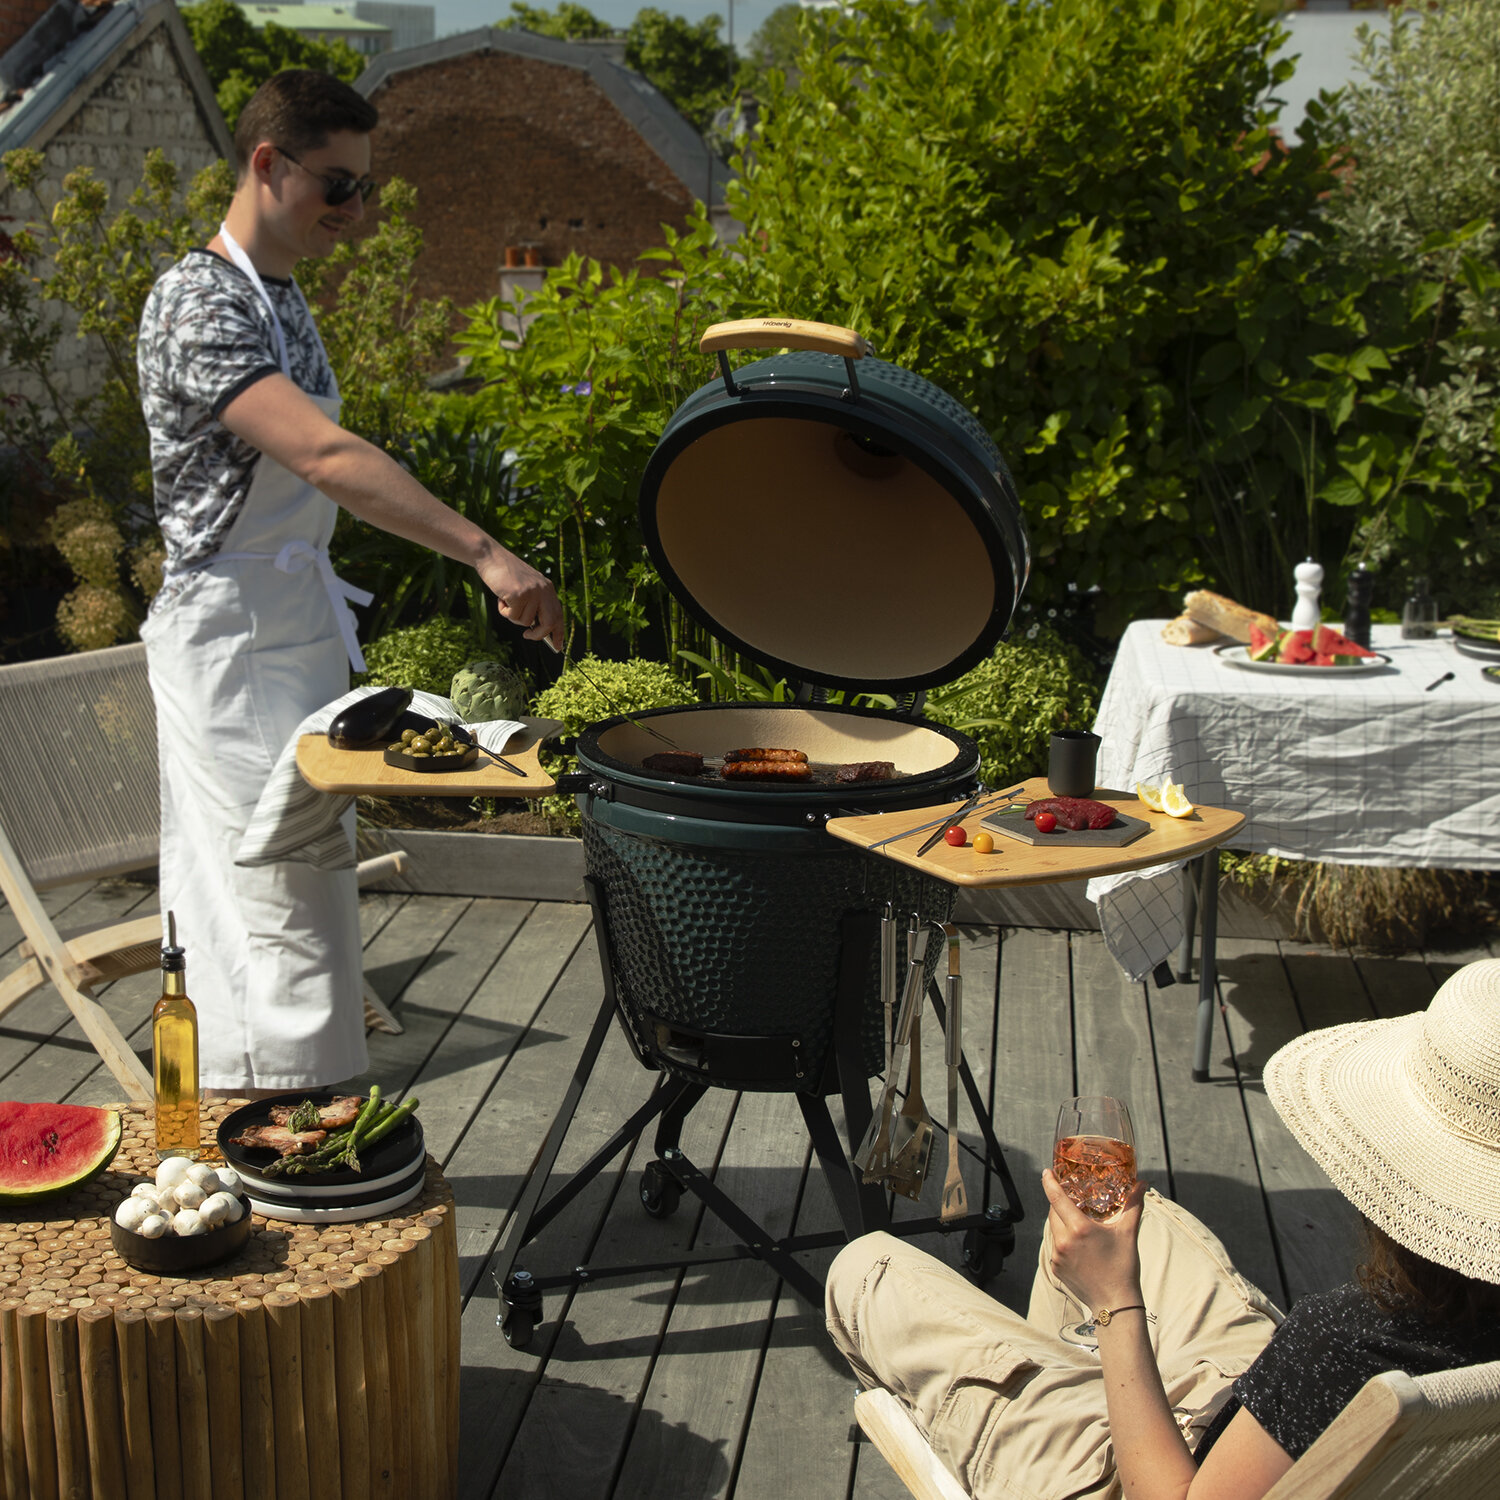 Barbecue giapponese 'Kamado' 21